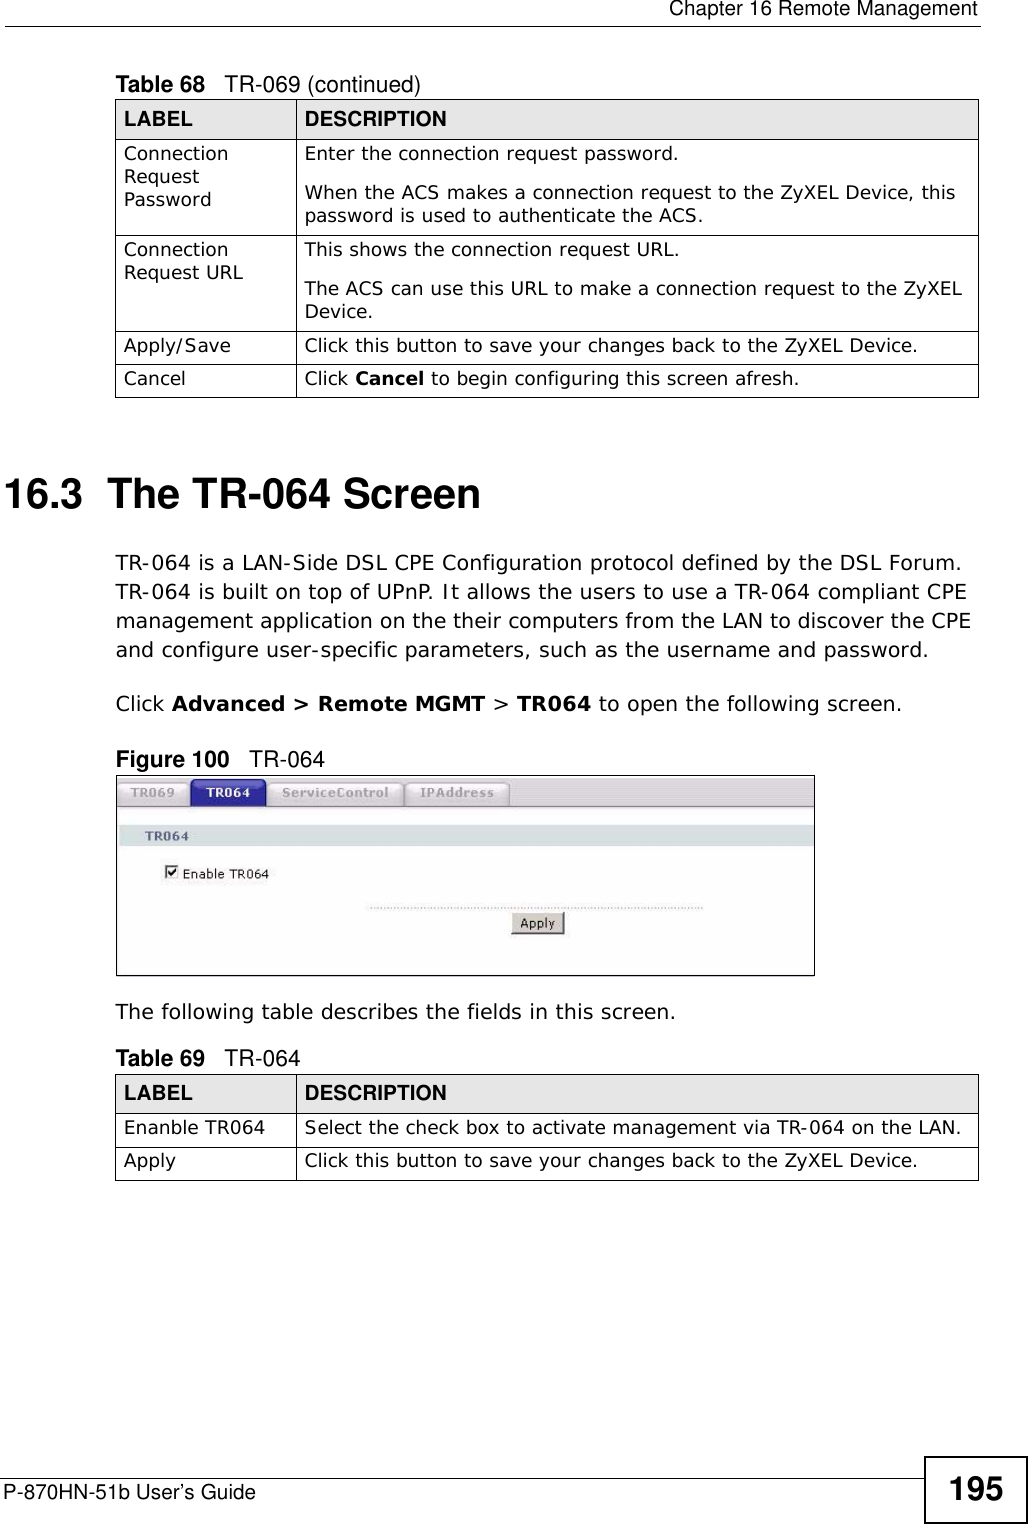  Chapter 16 Remote ManagementP-870HN-51b User’s Guide 19516.3  The TR-064 ScreenTR-064 is a LAN-Side DSL CPE Configuration protocol defined by the DSL Forum. TR-064 is built on top of UPnP. It allows the users to use a TR-064 compliant CPE management application on the their computers from the LAN to discover the CPE and configure user-specific parameters, such as the username and password.Click Advanced &gt; Remote MGMT &gt; TR064 to open the following screen.  Figure 100   TR-064 The following table describes the fields in this screen. Connection Request PasswordEnter the connection request password.When the ACS makes a connection request to the ZyXEL Device, this password is used to authenticate the ACS.Connection Request URL This shows the connection request URL.The ACS can use this URL to make a connection request to the ZyXEL Device.Apply/Save Click this button to save your changes back to the ZyXEL Device.Cancel Click Cancel to begin configuring this screen afresh.Table 68   TR-069 (continued)LABEL DESCRIPTIONTable 69   TR-064LABEL DESCRIPTIONEnanble TR064 Select the check box to activate management via TR-064 on the LAN.Apply Click this button to save your changes back to the ZyXEL Device.